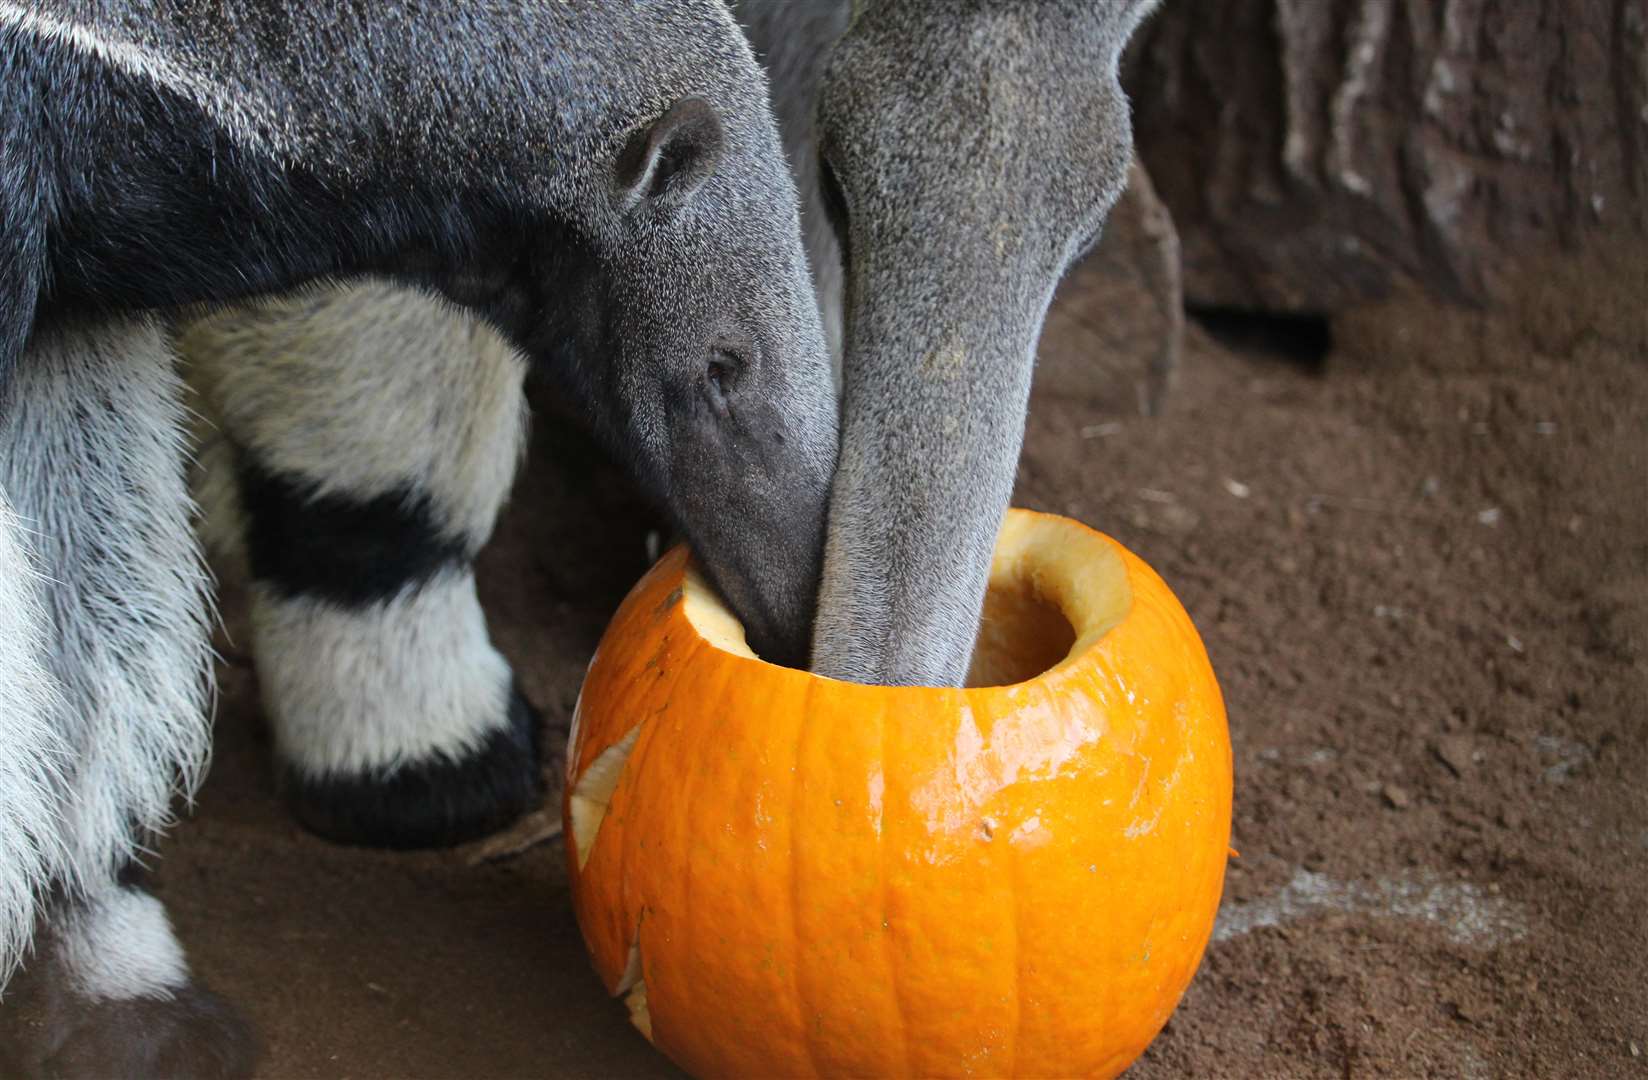 The giant anteaters try their treats at Howletts Wild Animal Park